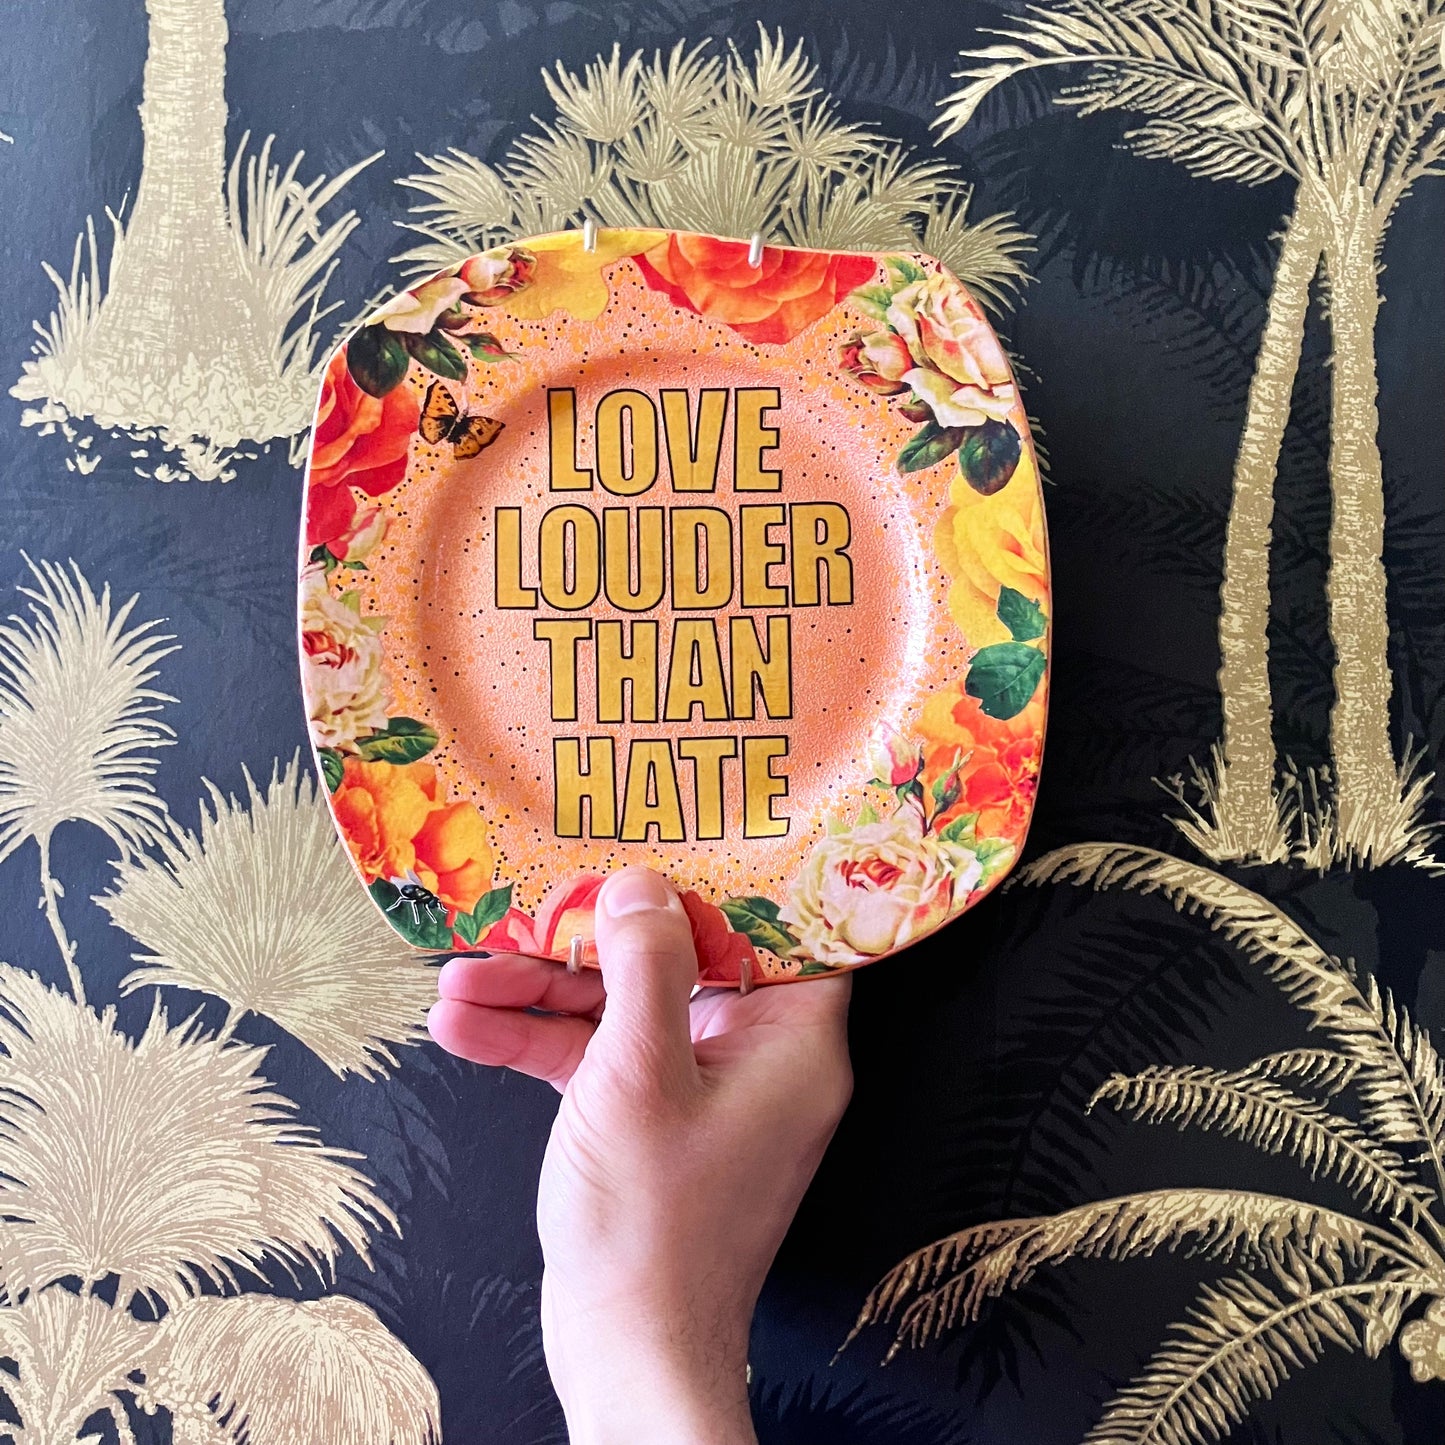 "Love Louder Than Hate" Upcycled Wall Plate by House of Frisson, featuring a collage of the words "love louder than hate" set against a peach background and framed by roses. Showing a closeup of someone holding the plate.